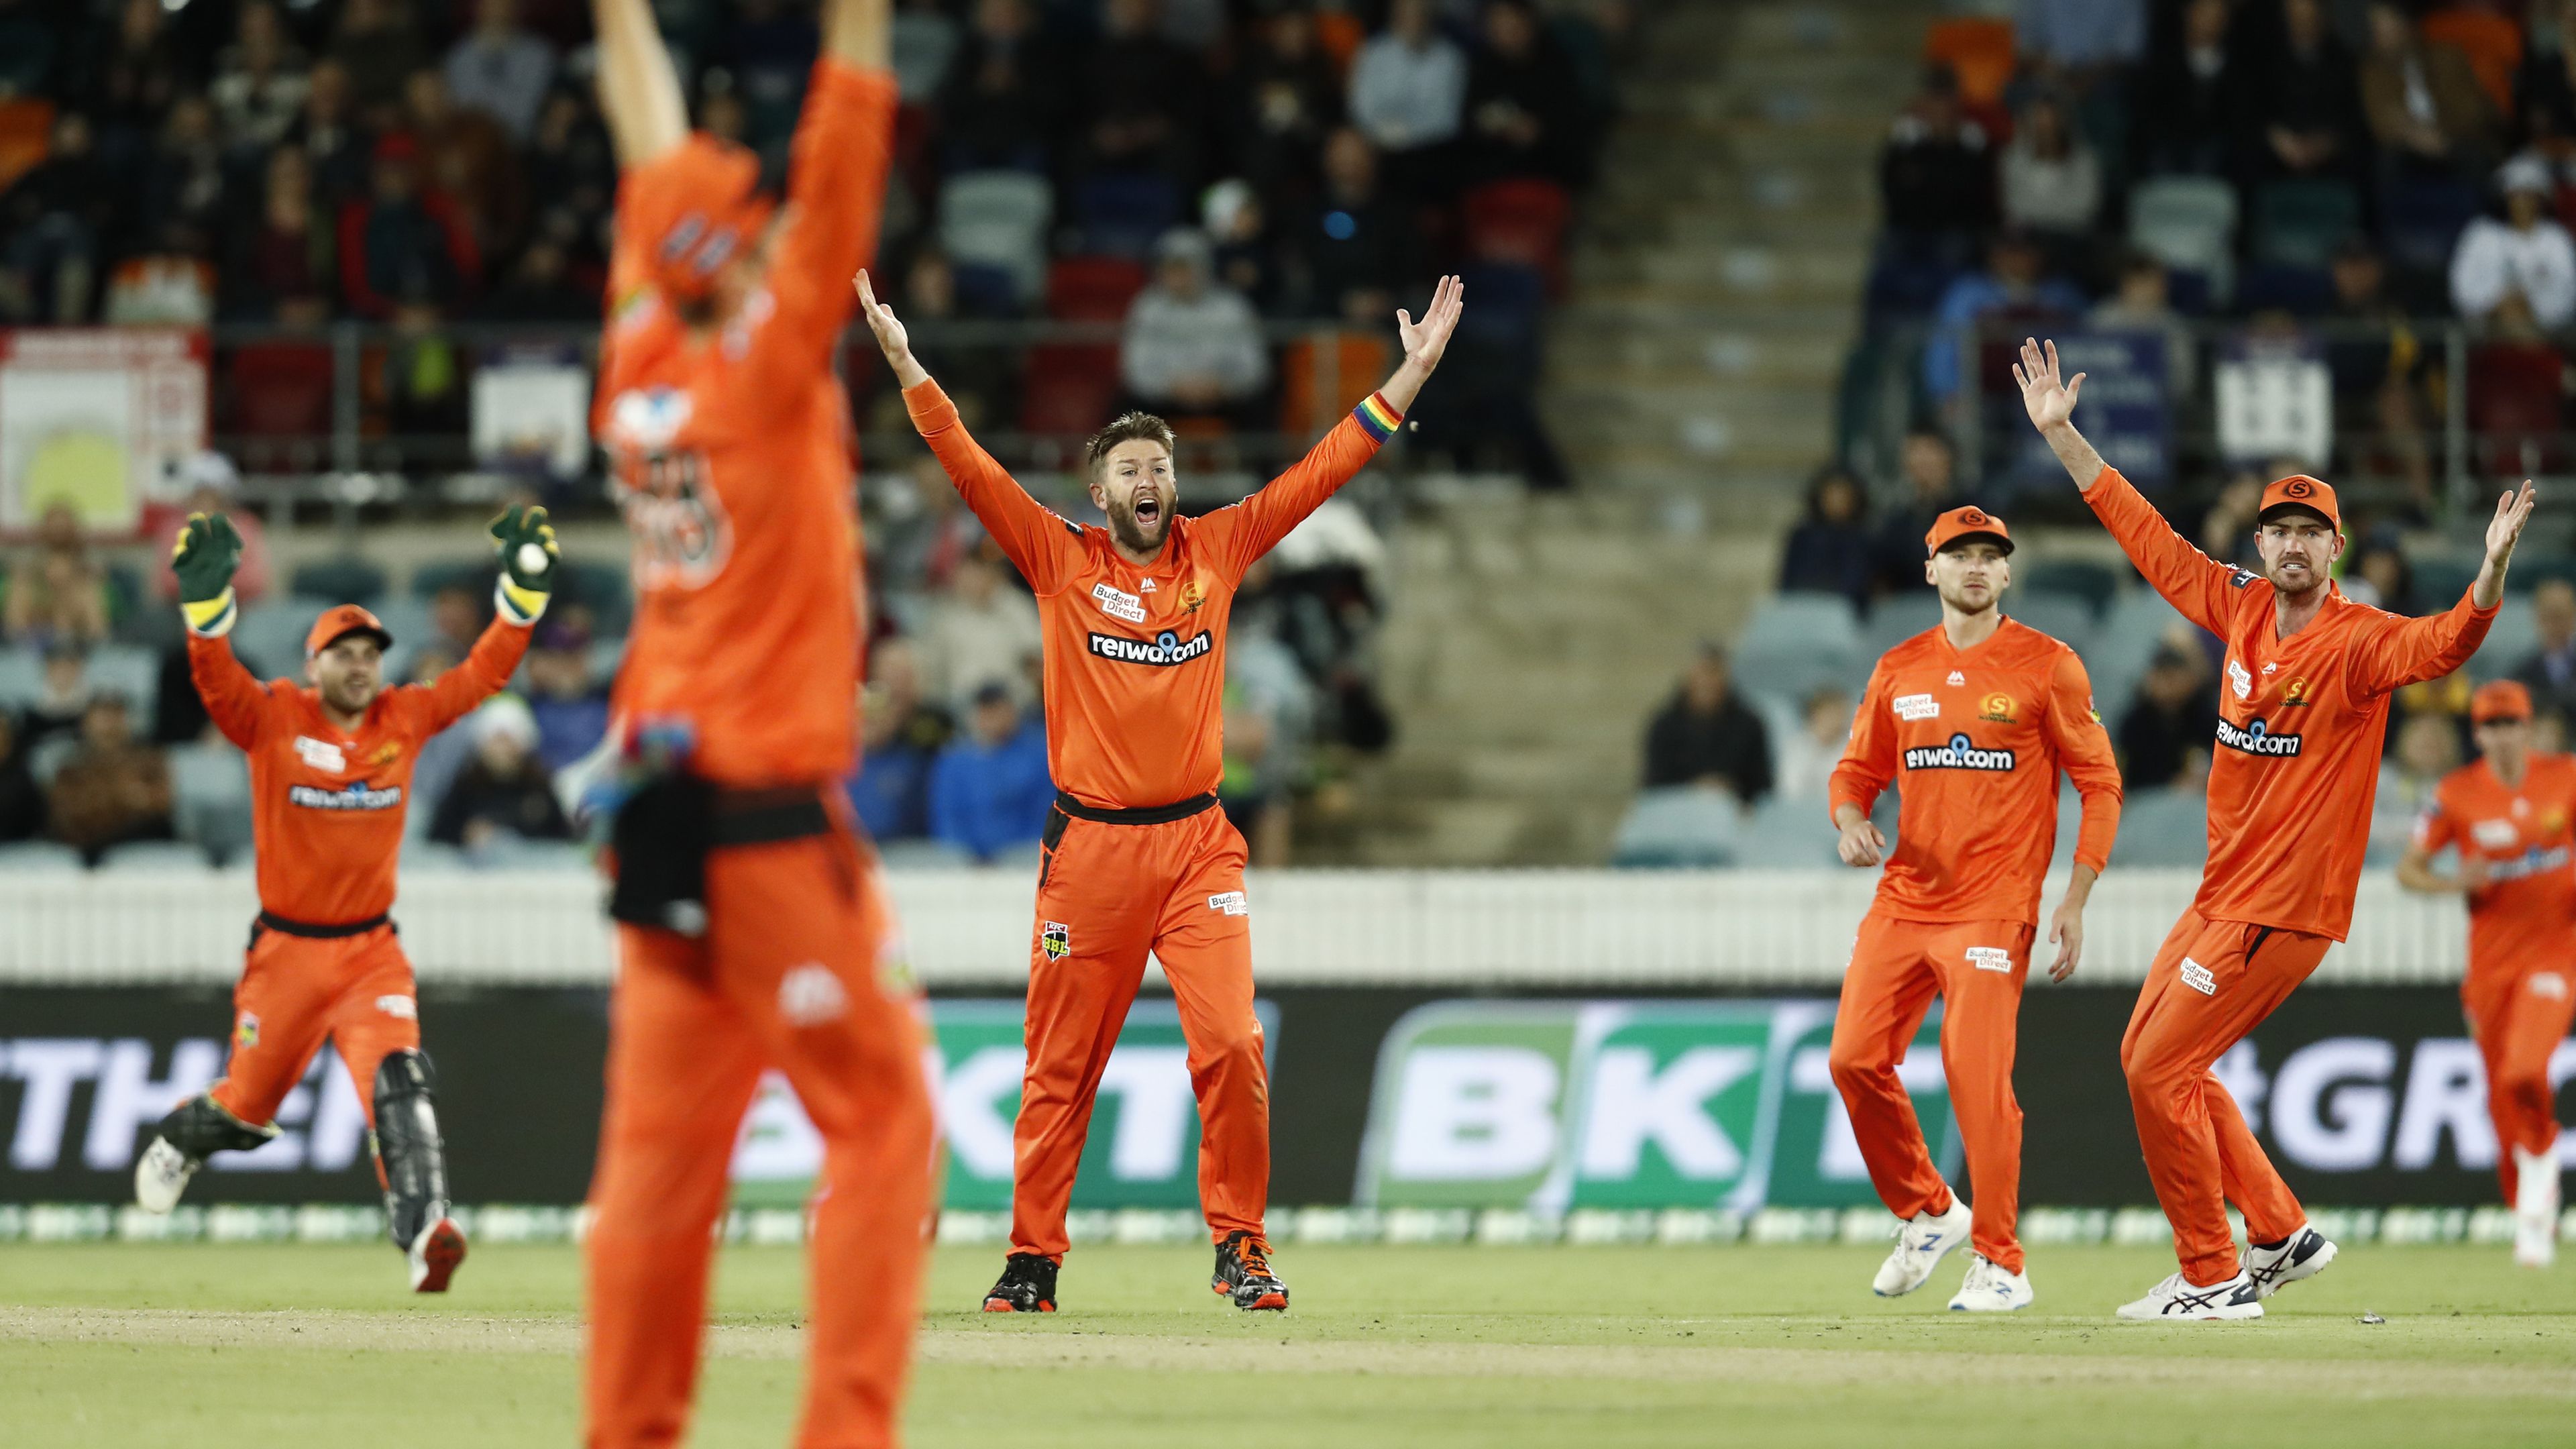 Big Bash League introduces review system in an effort to eliminate howlers